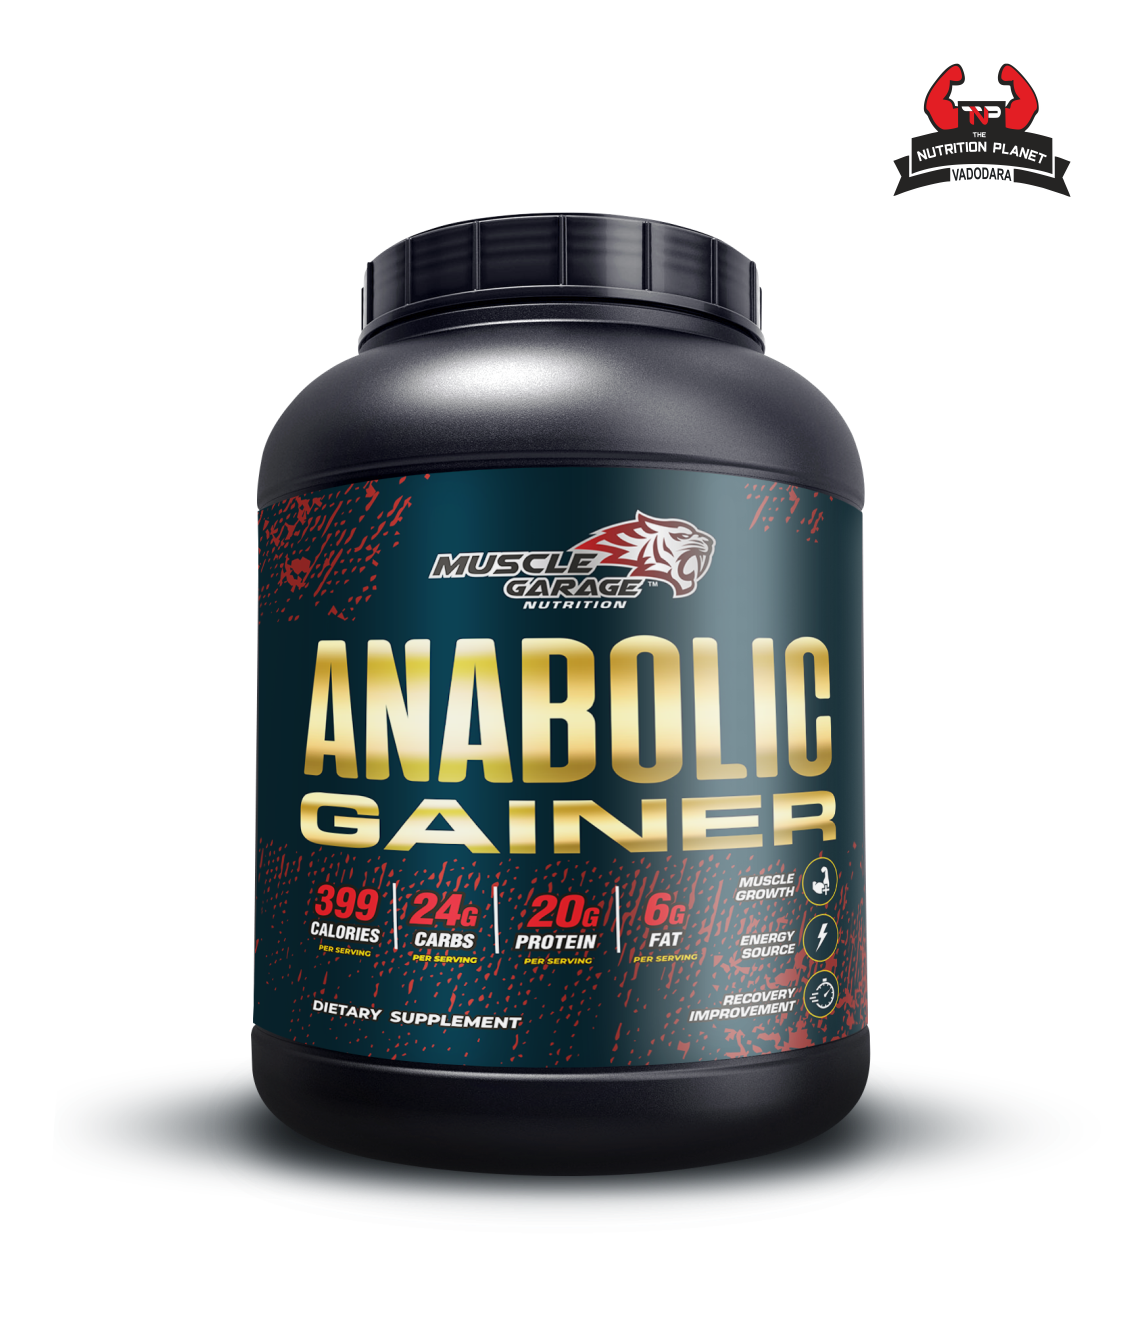 Muscle garage Anabolic Mass Gainer Low Carb 6lbs.